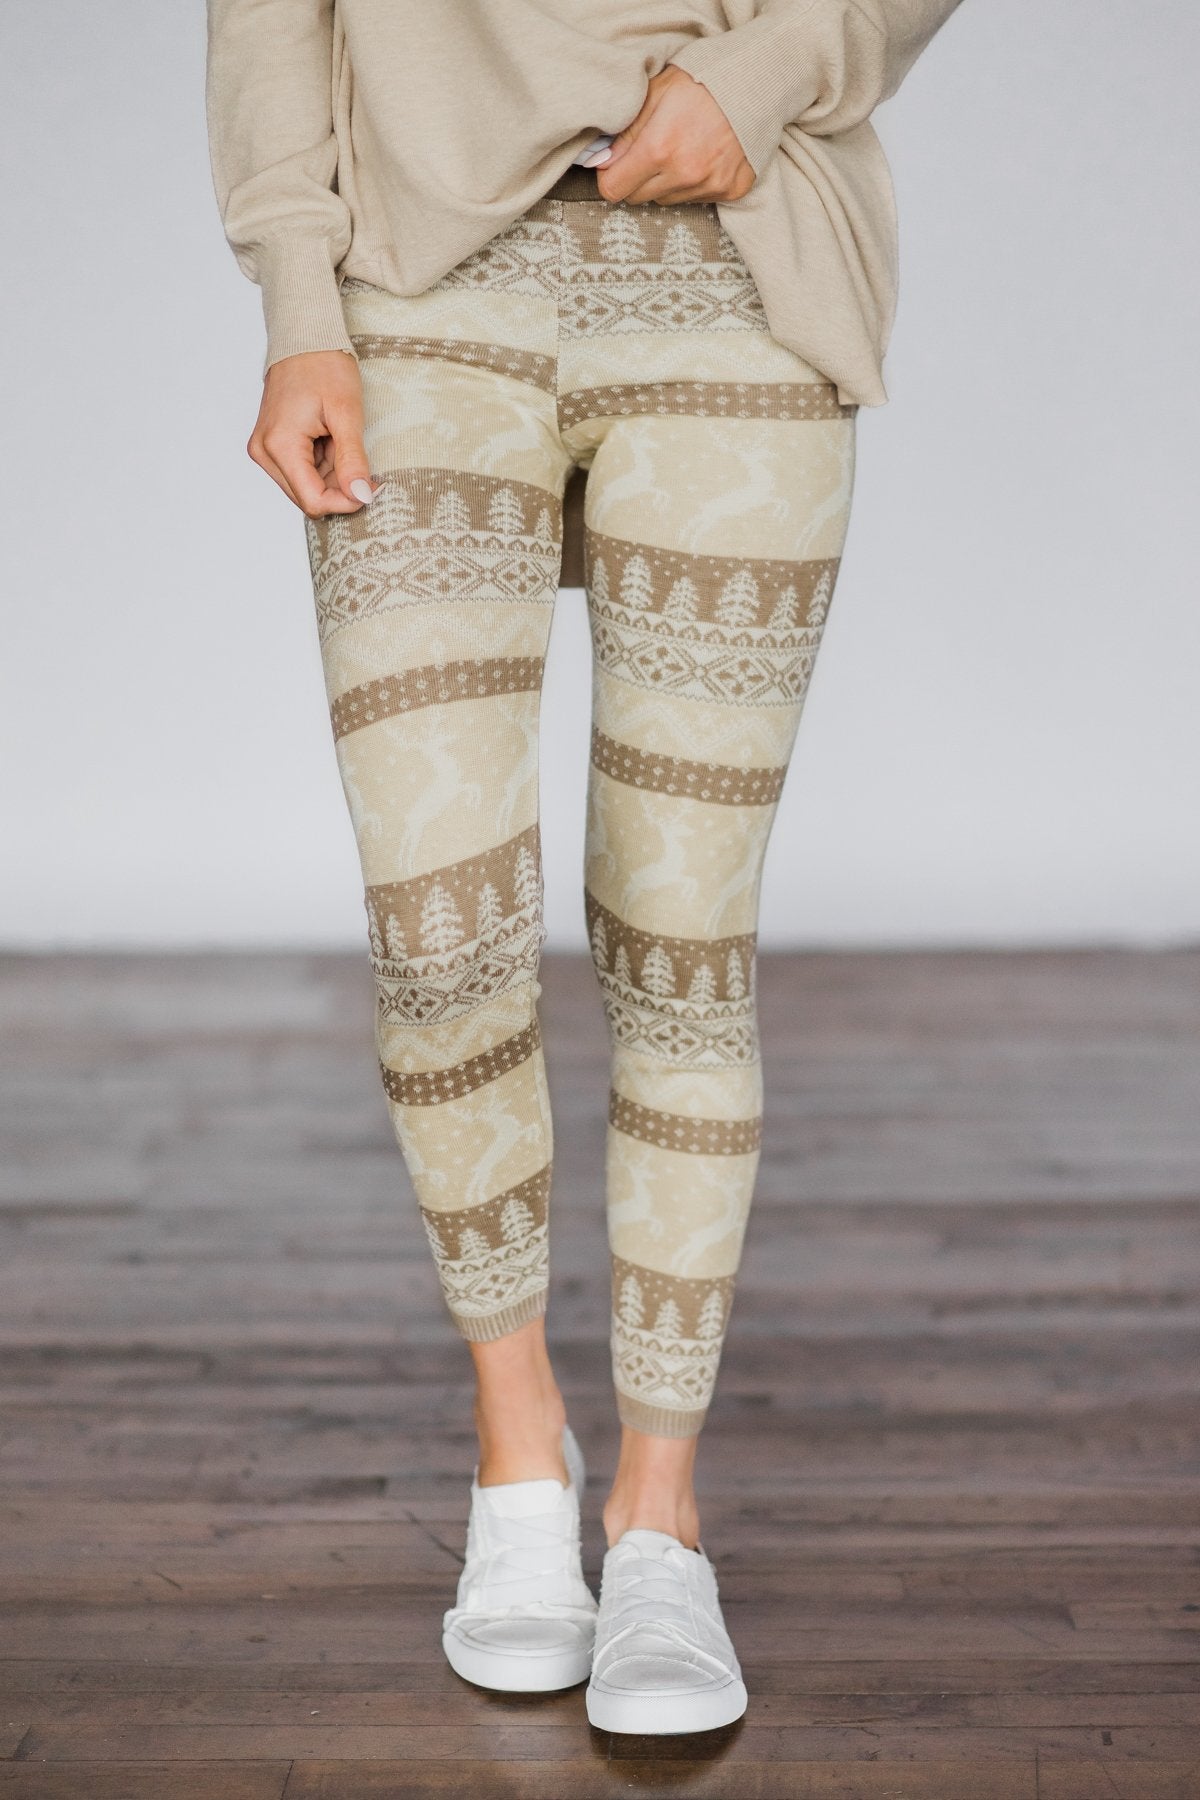 Prancing through the Snow ~ Tan Holiday Leggings – The Pulse Boutique